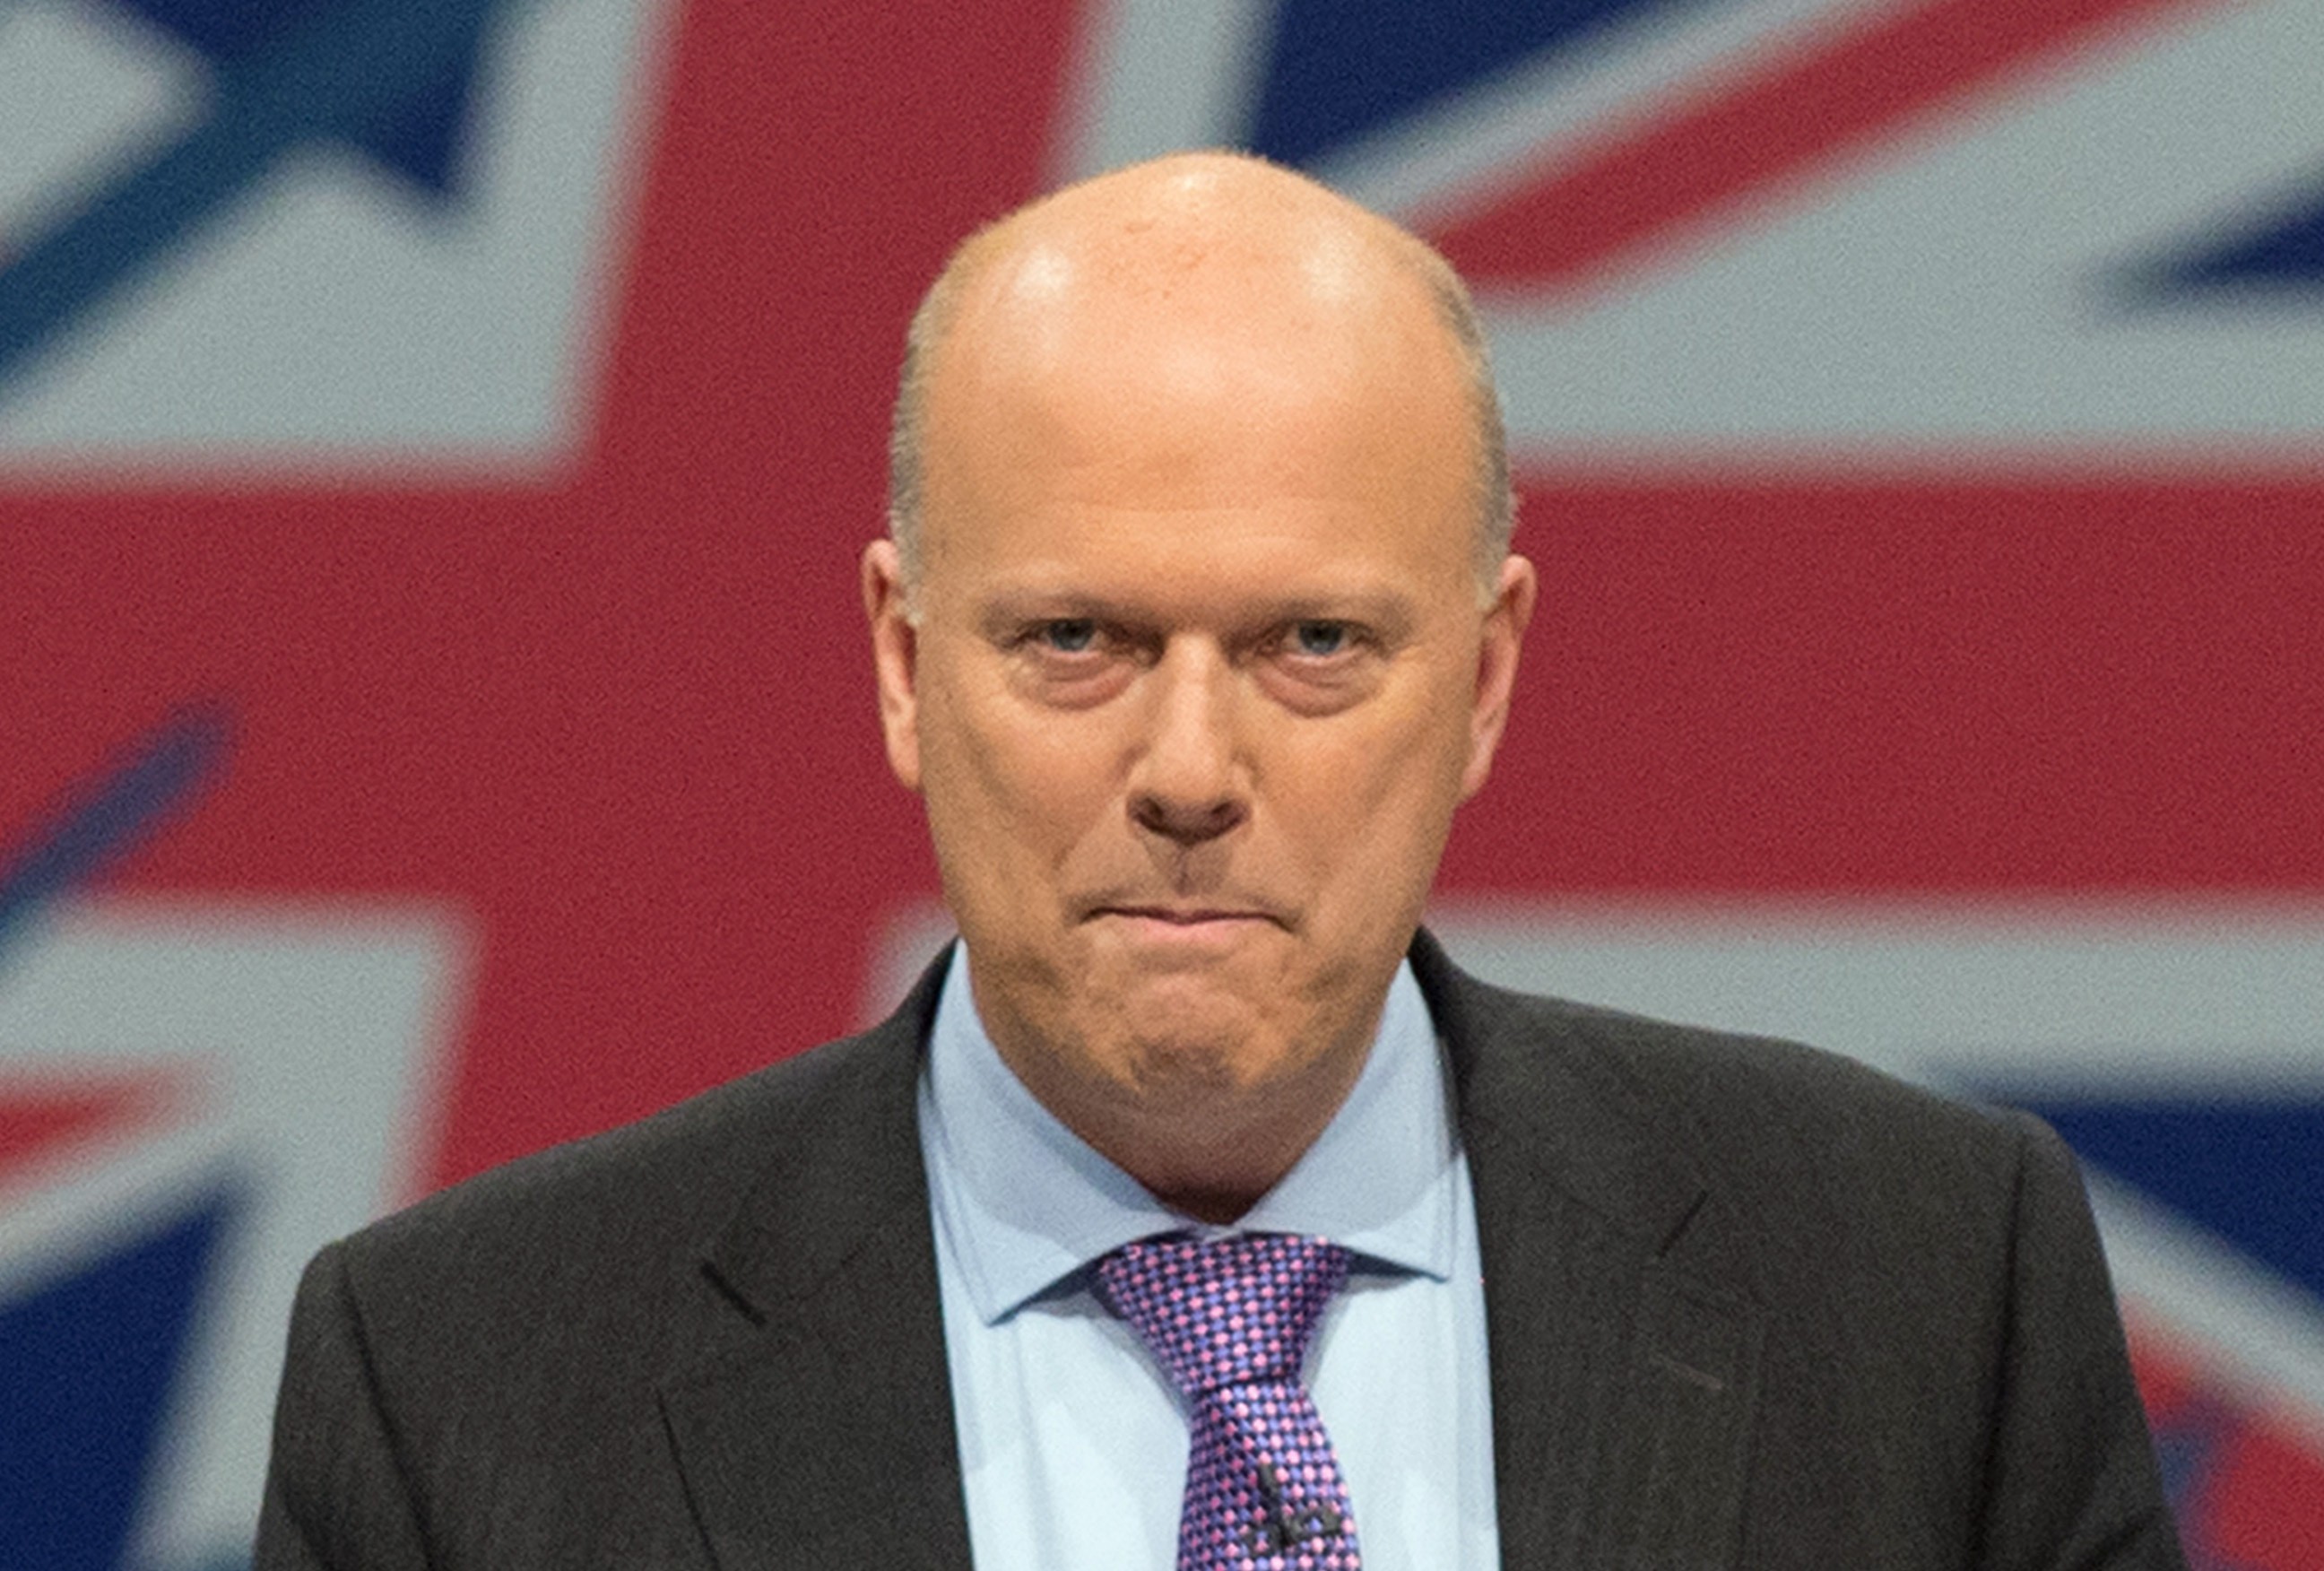 Leader of the House of Commons Chris Grayling (PA Wire/Press Association Images)